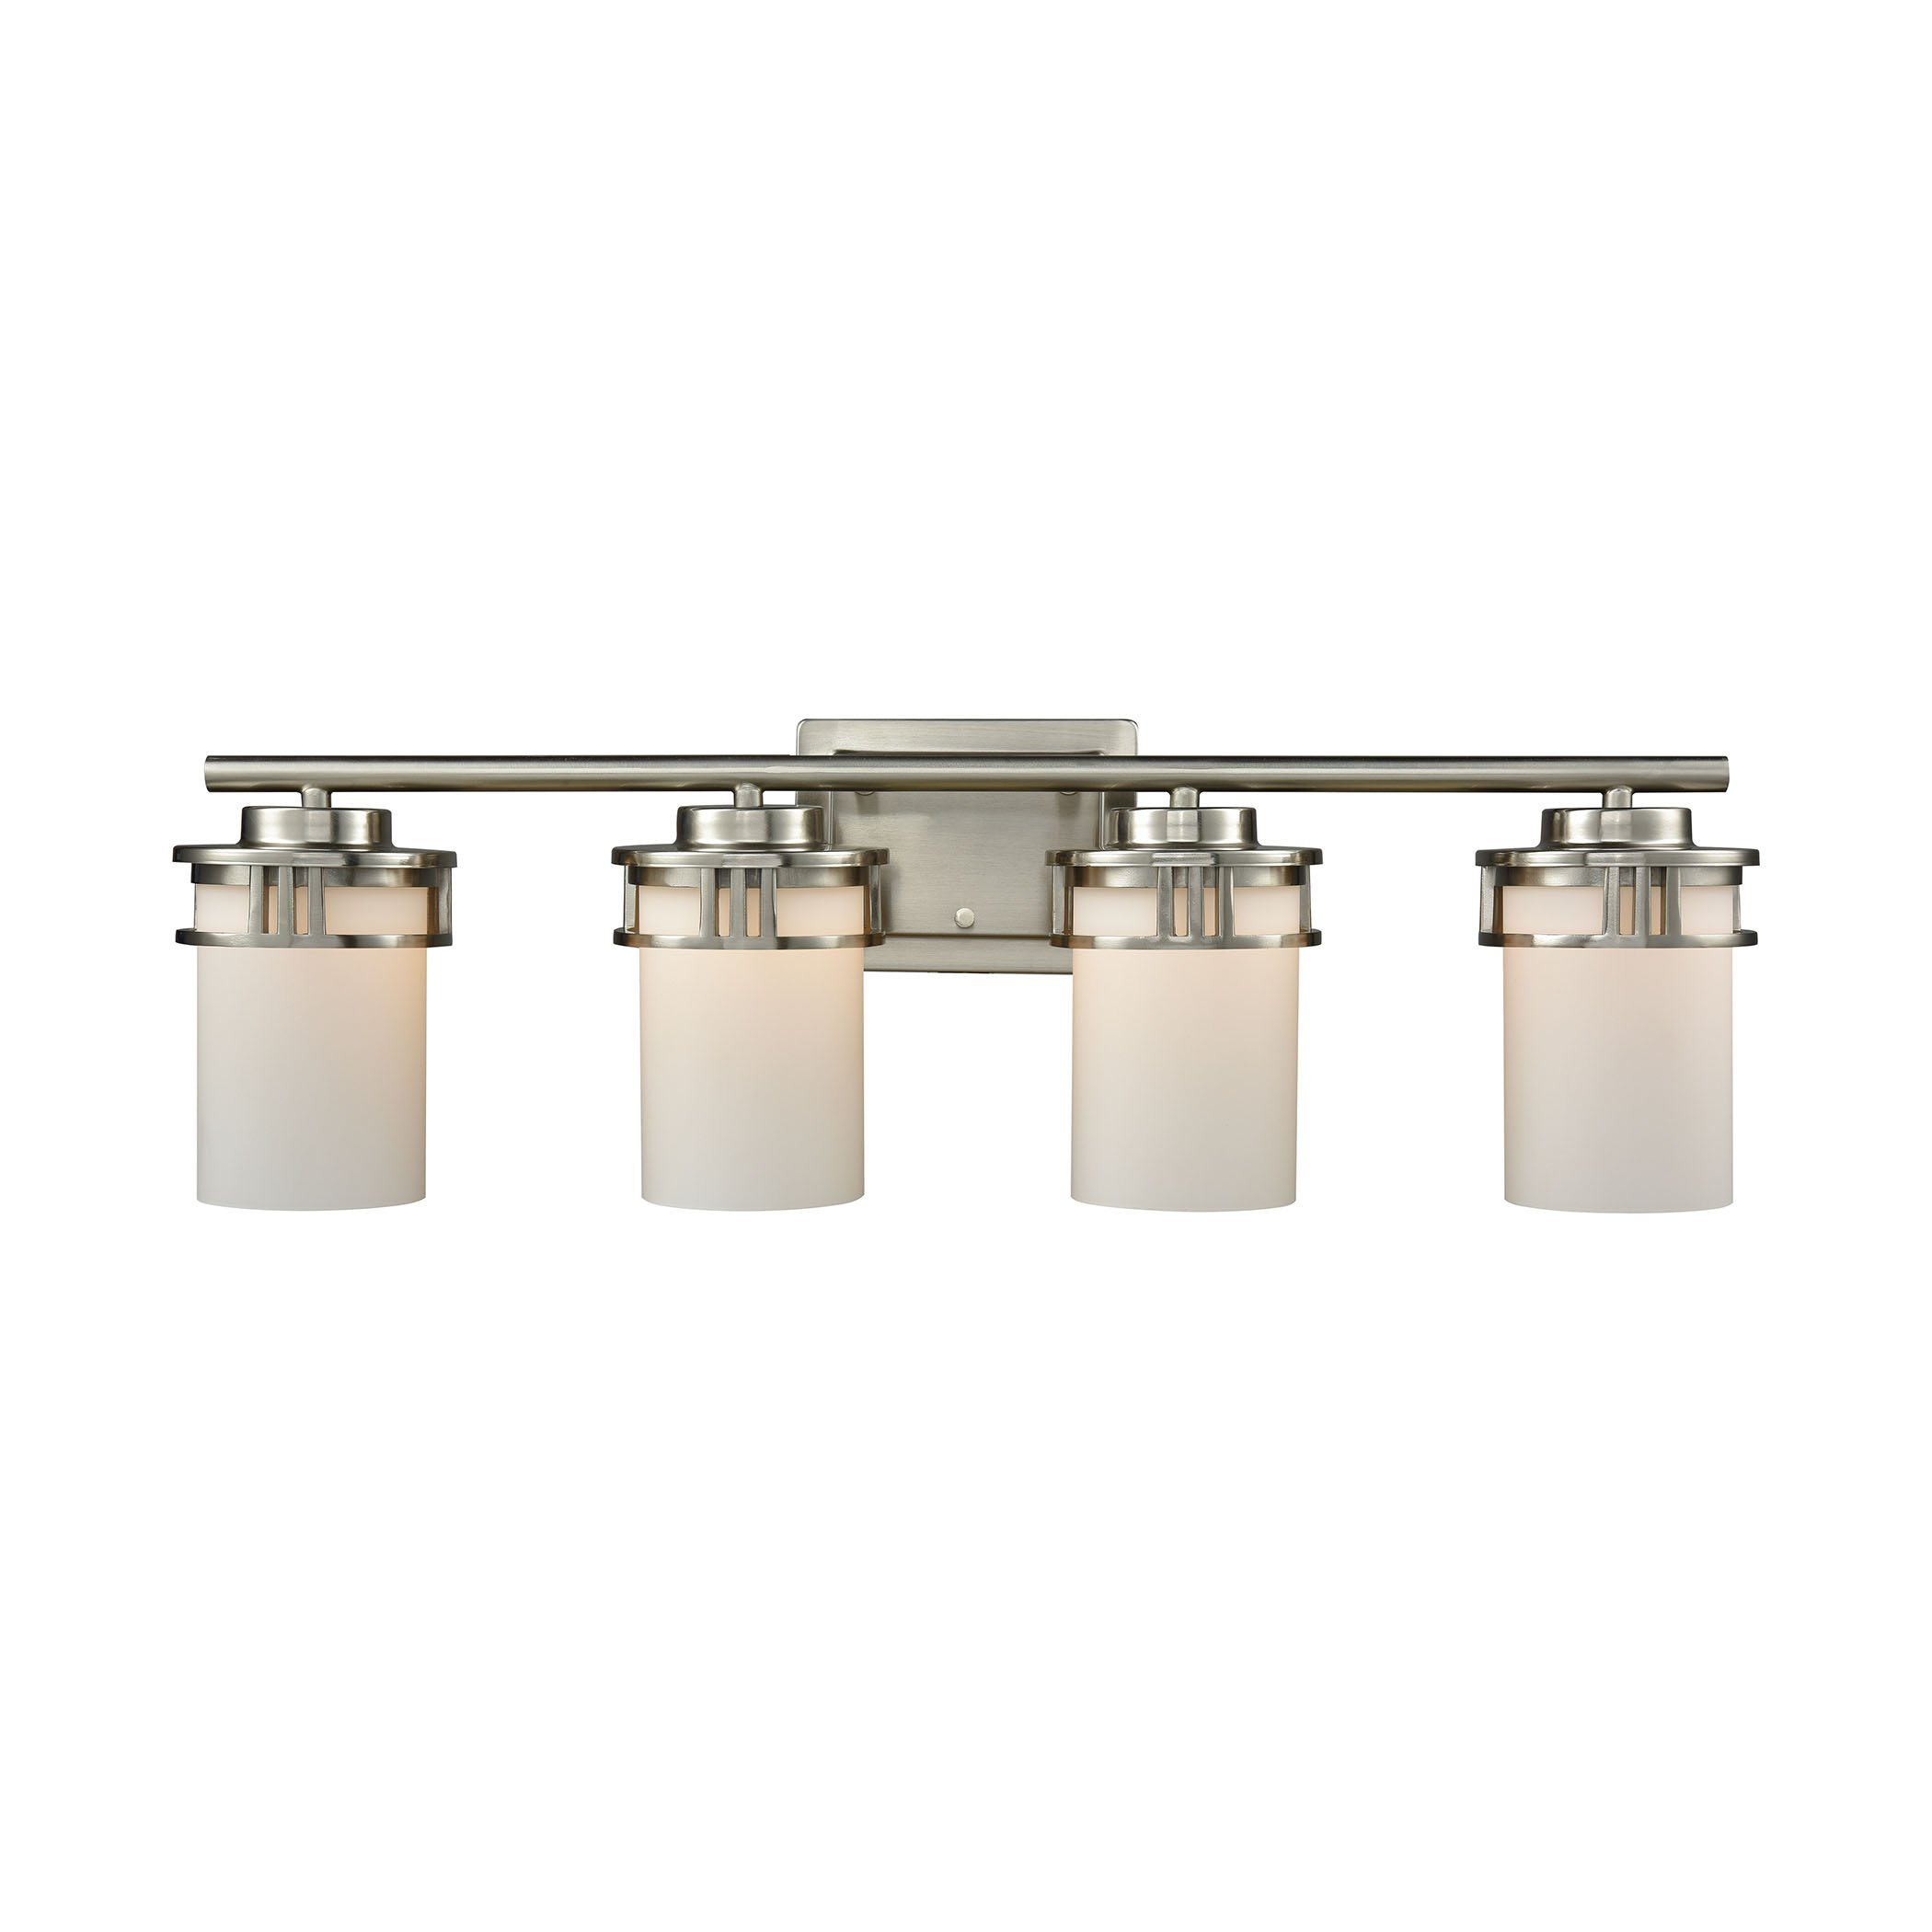 Ravendale 4-Light Bath Vanity Fixture in Brushed Nickel with Opal White Glass Wall Thomas Lighting 